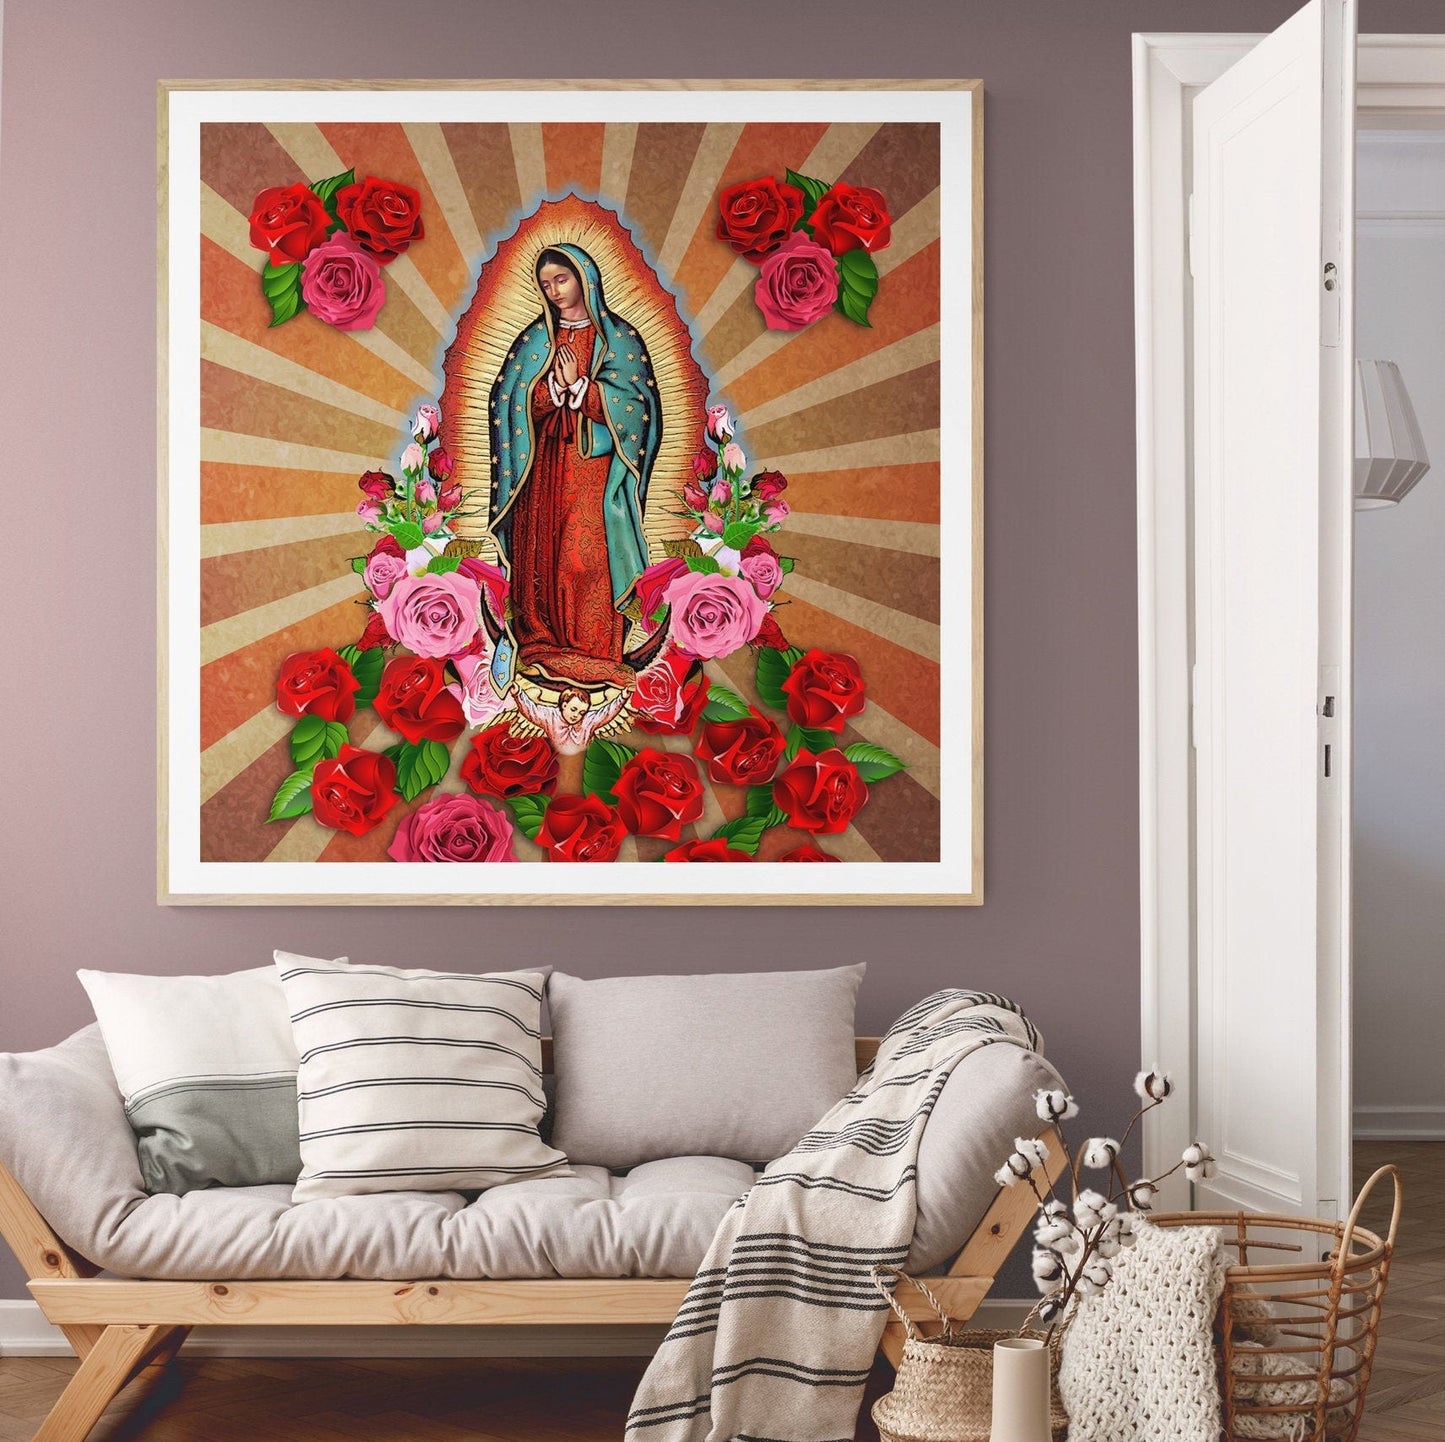 Our Lady of Guadalupe Fabric square, Virgin Mary fabric panel for crafts, pillow covers, wall art, bandanas. Available in Brown or Purple